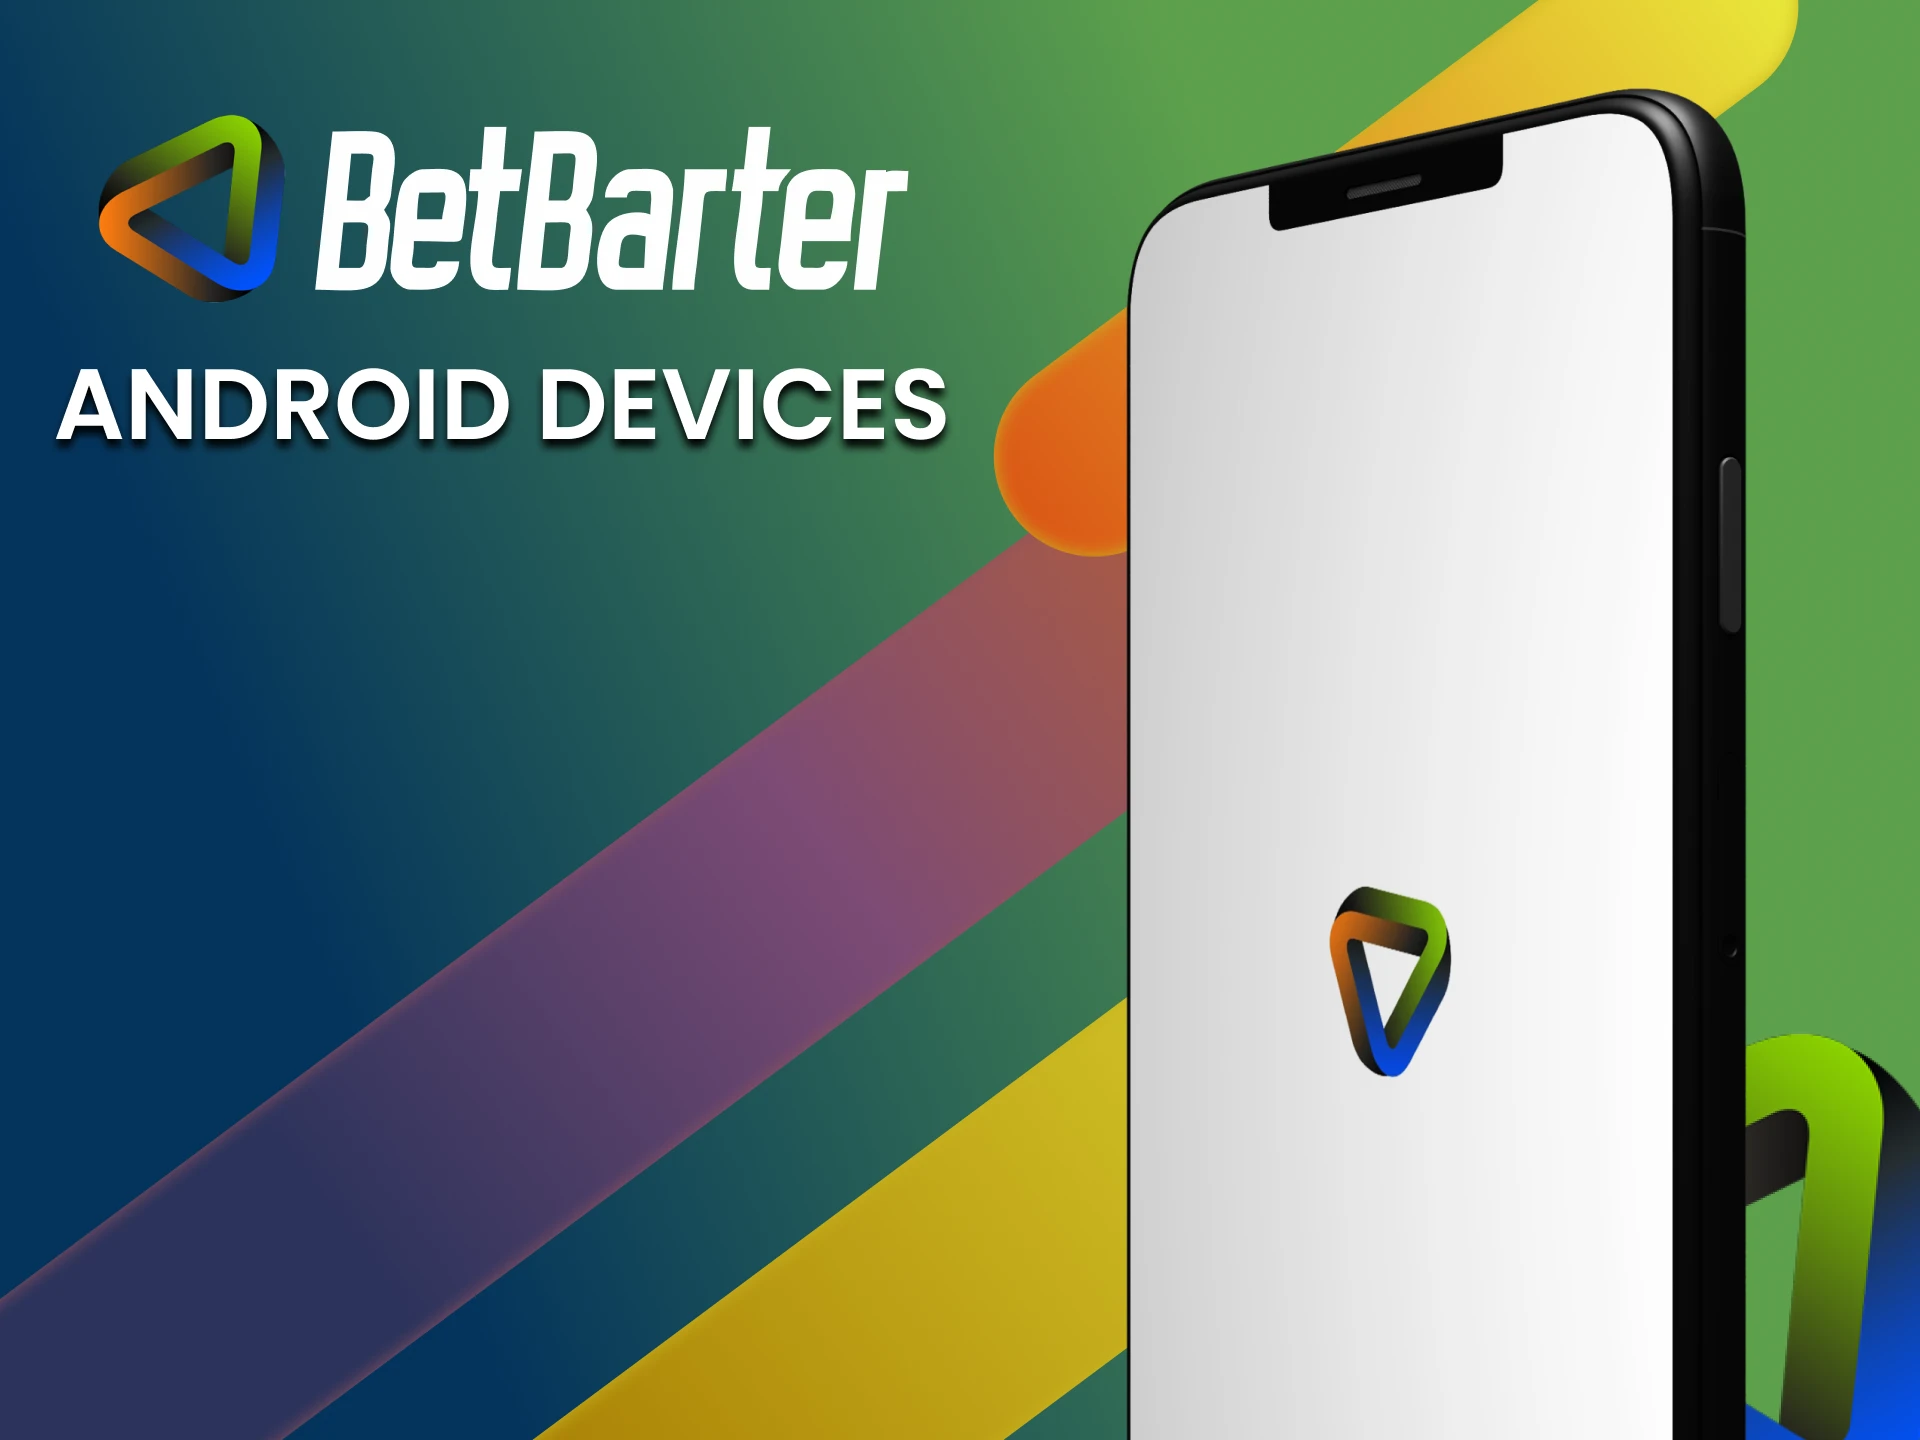 Use the BetBarter apk app on Android devices.